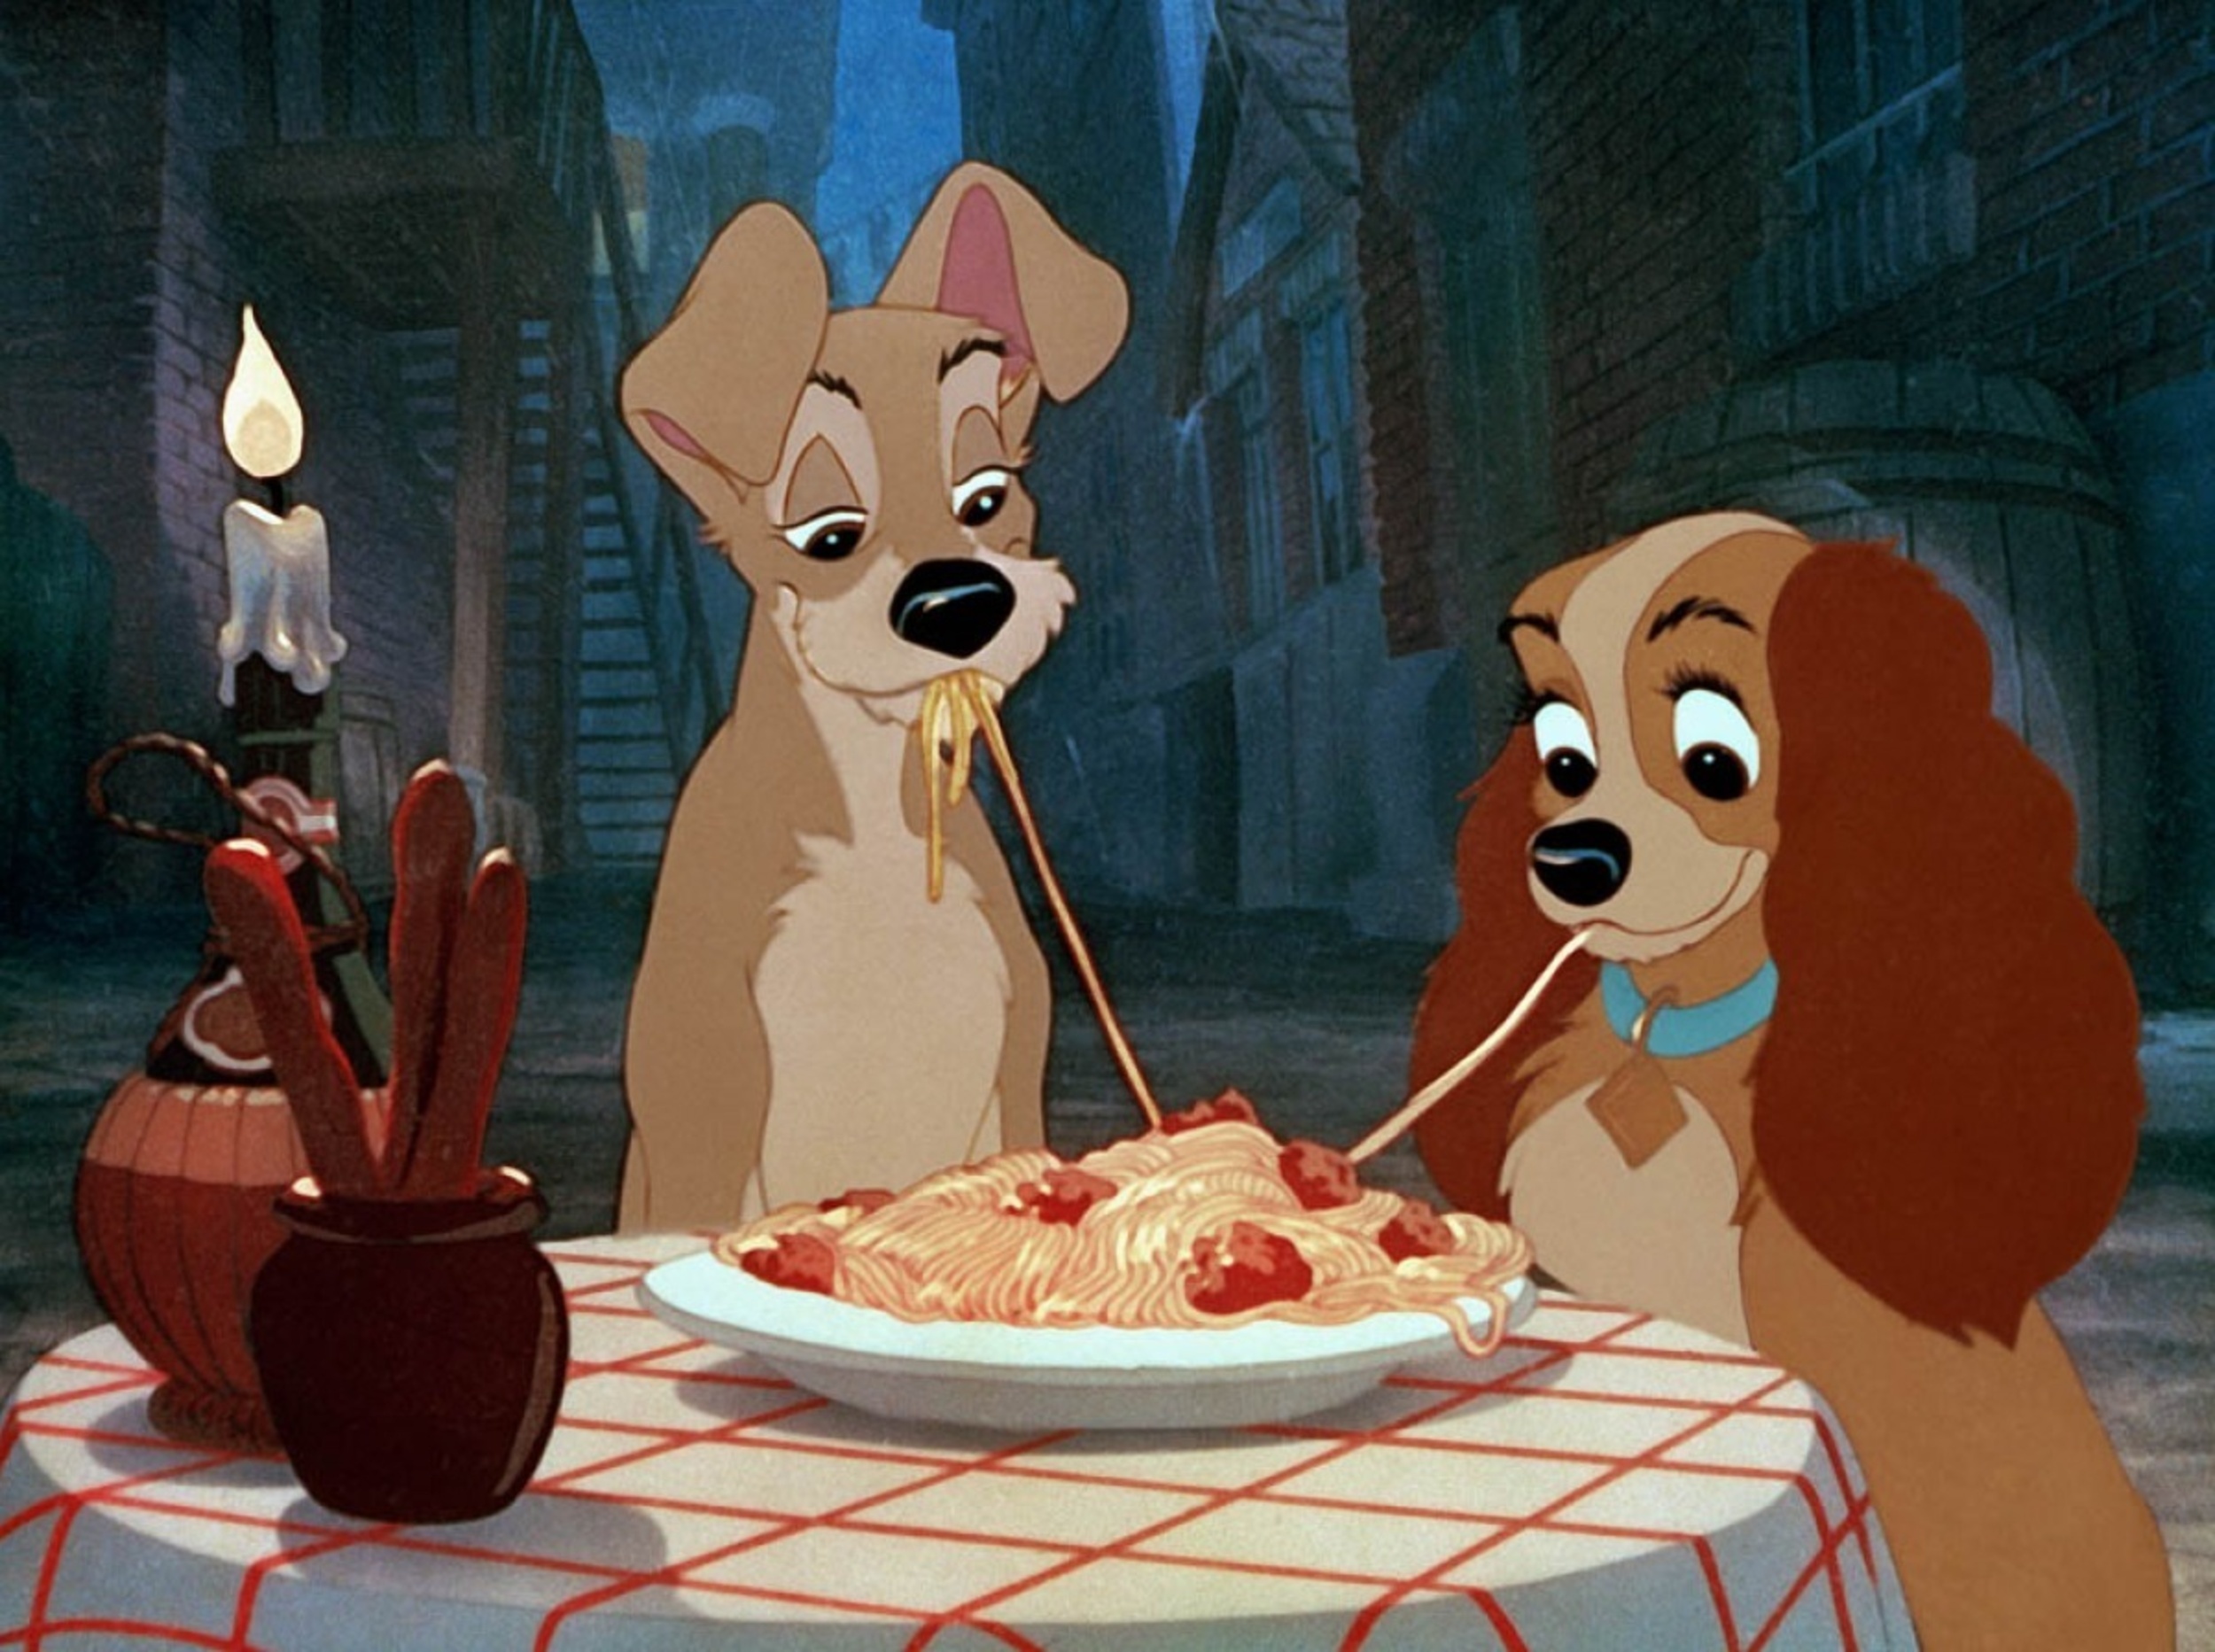 <p>The successful use of CinemaScope wasn't limited to Disney's live-action pictures. This romantic comedy about two dogs from different sides of the streets was the first of Disney's animated films to bring this massive cinematic technology to the big screen. </p><p>The story for <em>Lady and the Tramp </em>marked a departure from its usual use of fairytales as source material. The original story came from a story called "Happy Dan, the Whistling Dog," written by Ward Greene that ran in <em>Cosmopolitan</em>. The designs for the dogs came from animator Joe Grant, who first drew sketches of his springer spaniel named Lady in the 1930s when Disney was just starting to build his film empire. Both of these sources were combined to create <em>Lady and the Tramp</em>. The emotional depth of its animal characters made it an endearing story that would inspire filmmakers for generations to come. </p><p>You may also like: <a href='https://www.yardbarker.com/entertainment/articles/the_20_best_songs_by_boy_bands_040624/s1__39501957'>The 20 best songs by boy bands</a></p>